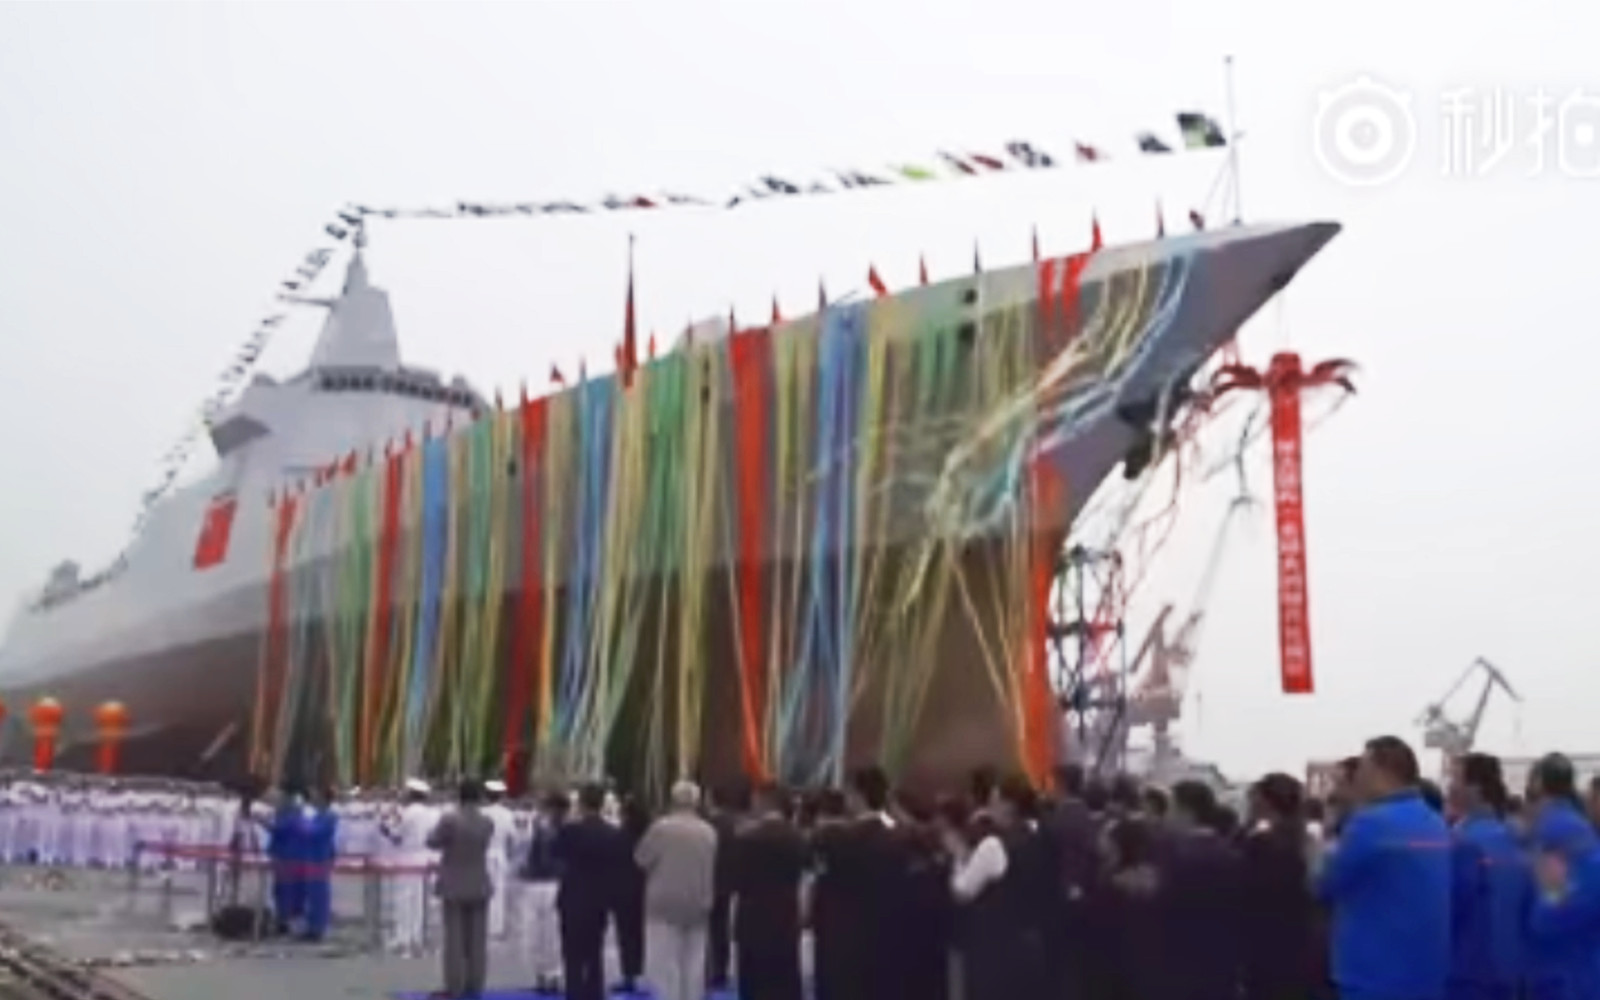 Bigger Than A U.S. Navy AEGIS Cruiser: China Is Building More Type